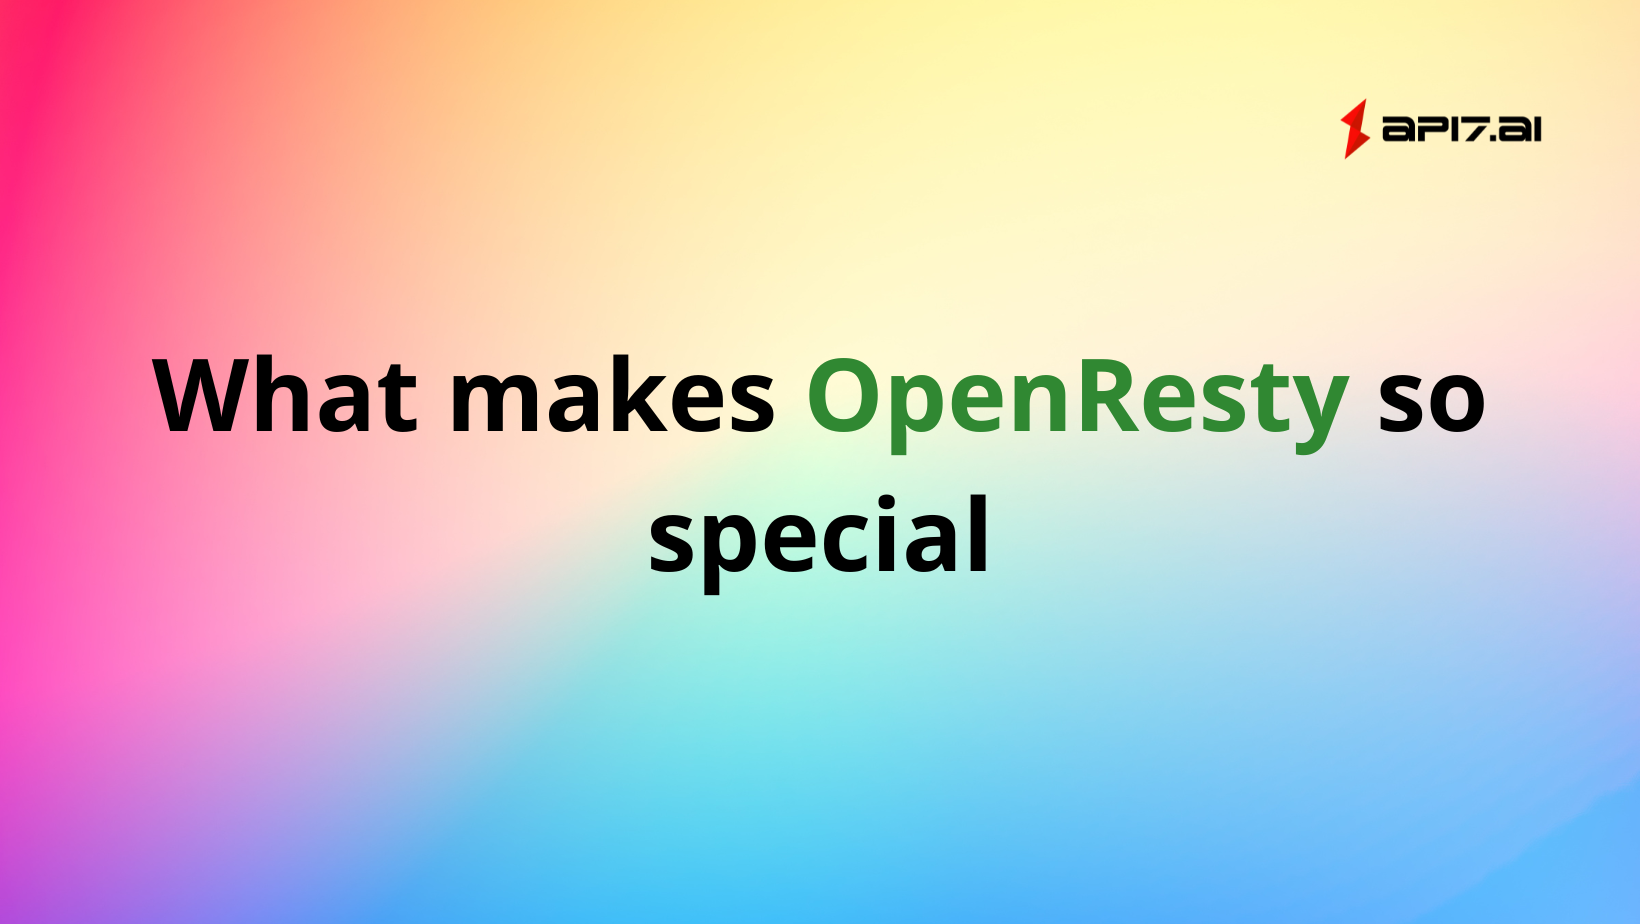 What makes OpenResty so special